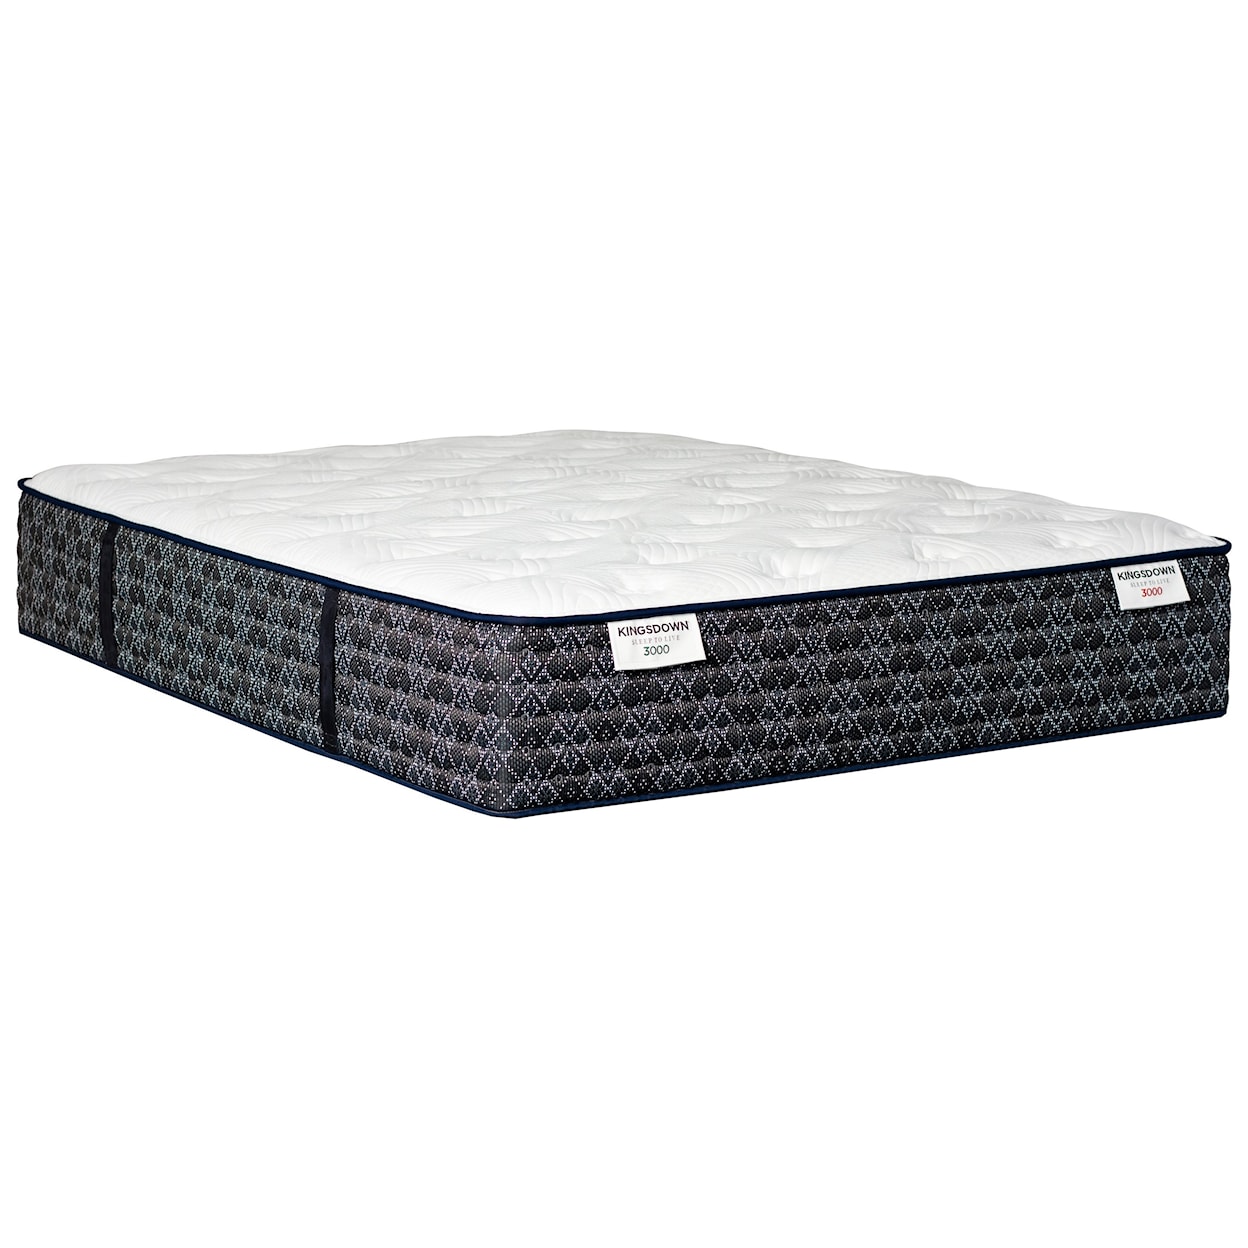 Kingsdown Sleep to Live 3000 Gold Blue Queen Pocketed Coil Mattress